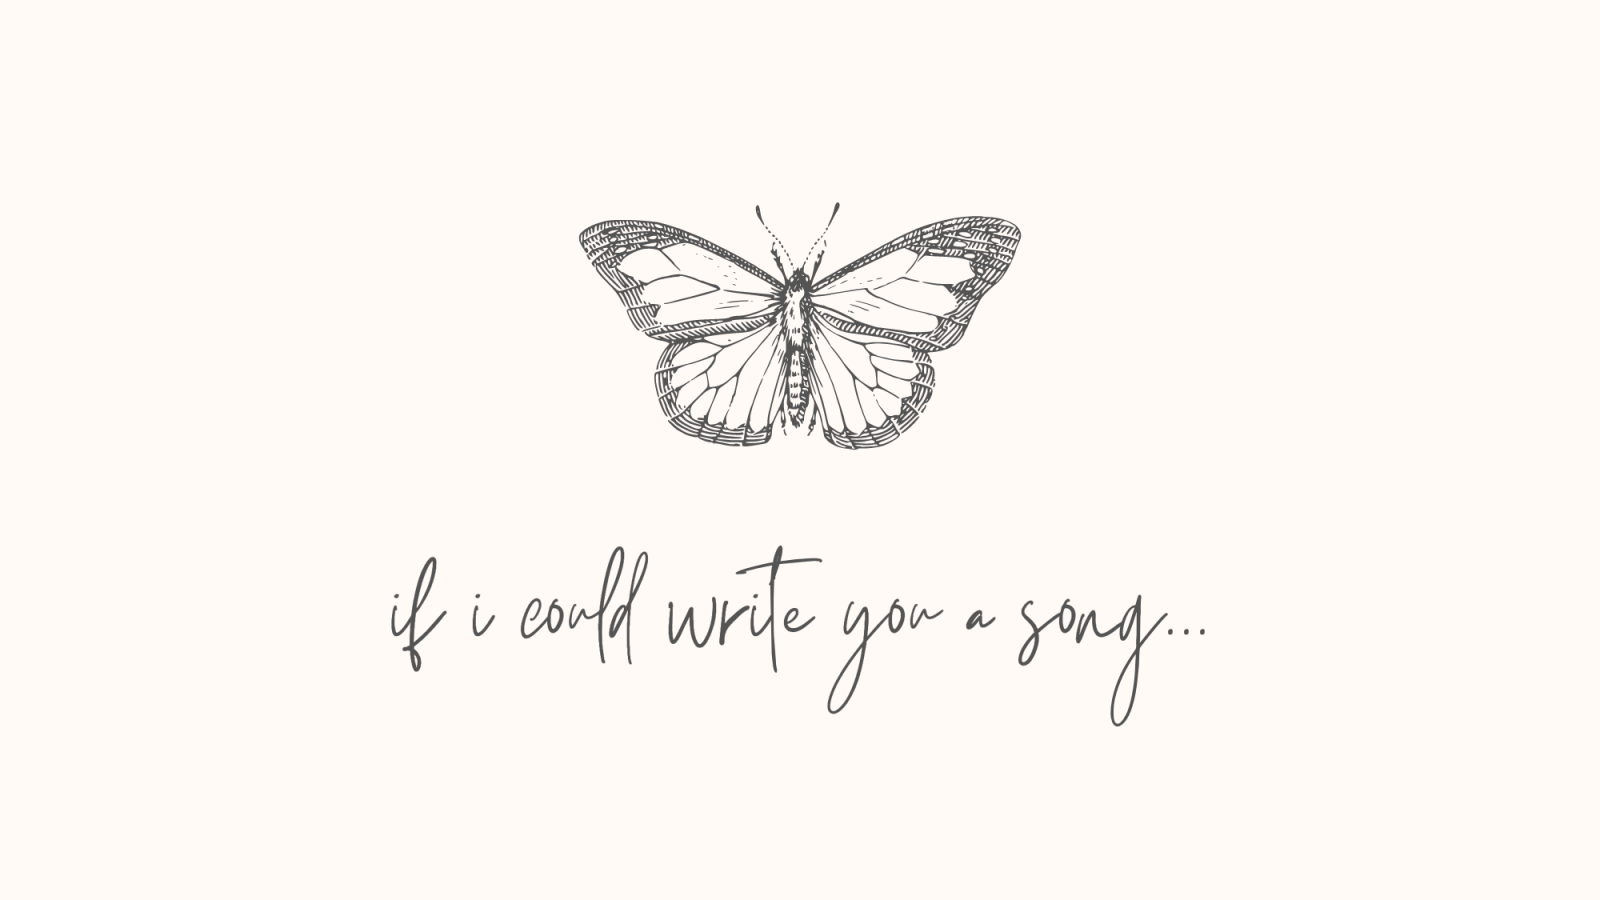 &quot;if i could write you a song&quot; title in cursive lettering under an illustration of a butterfly